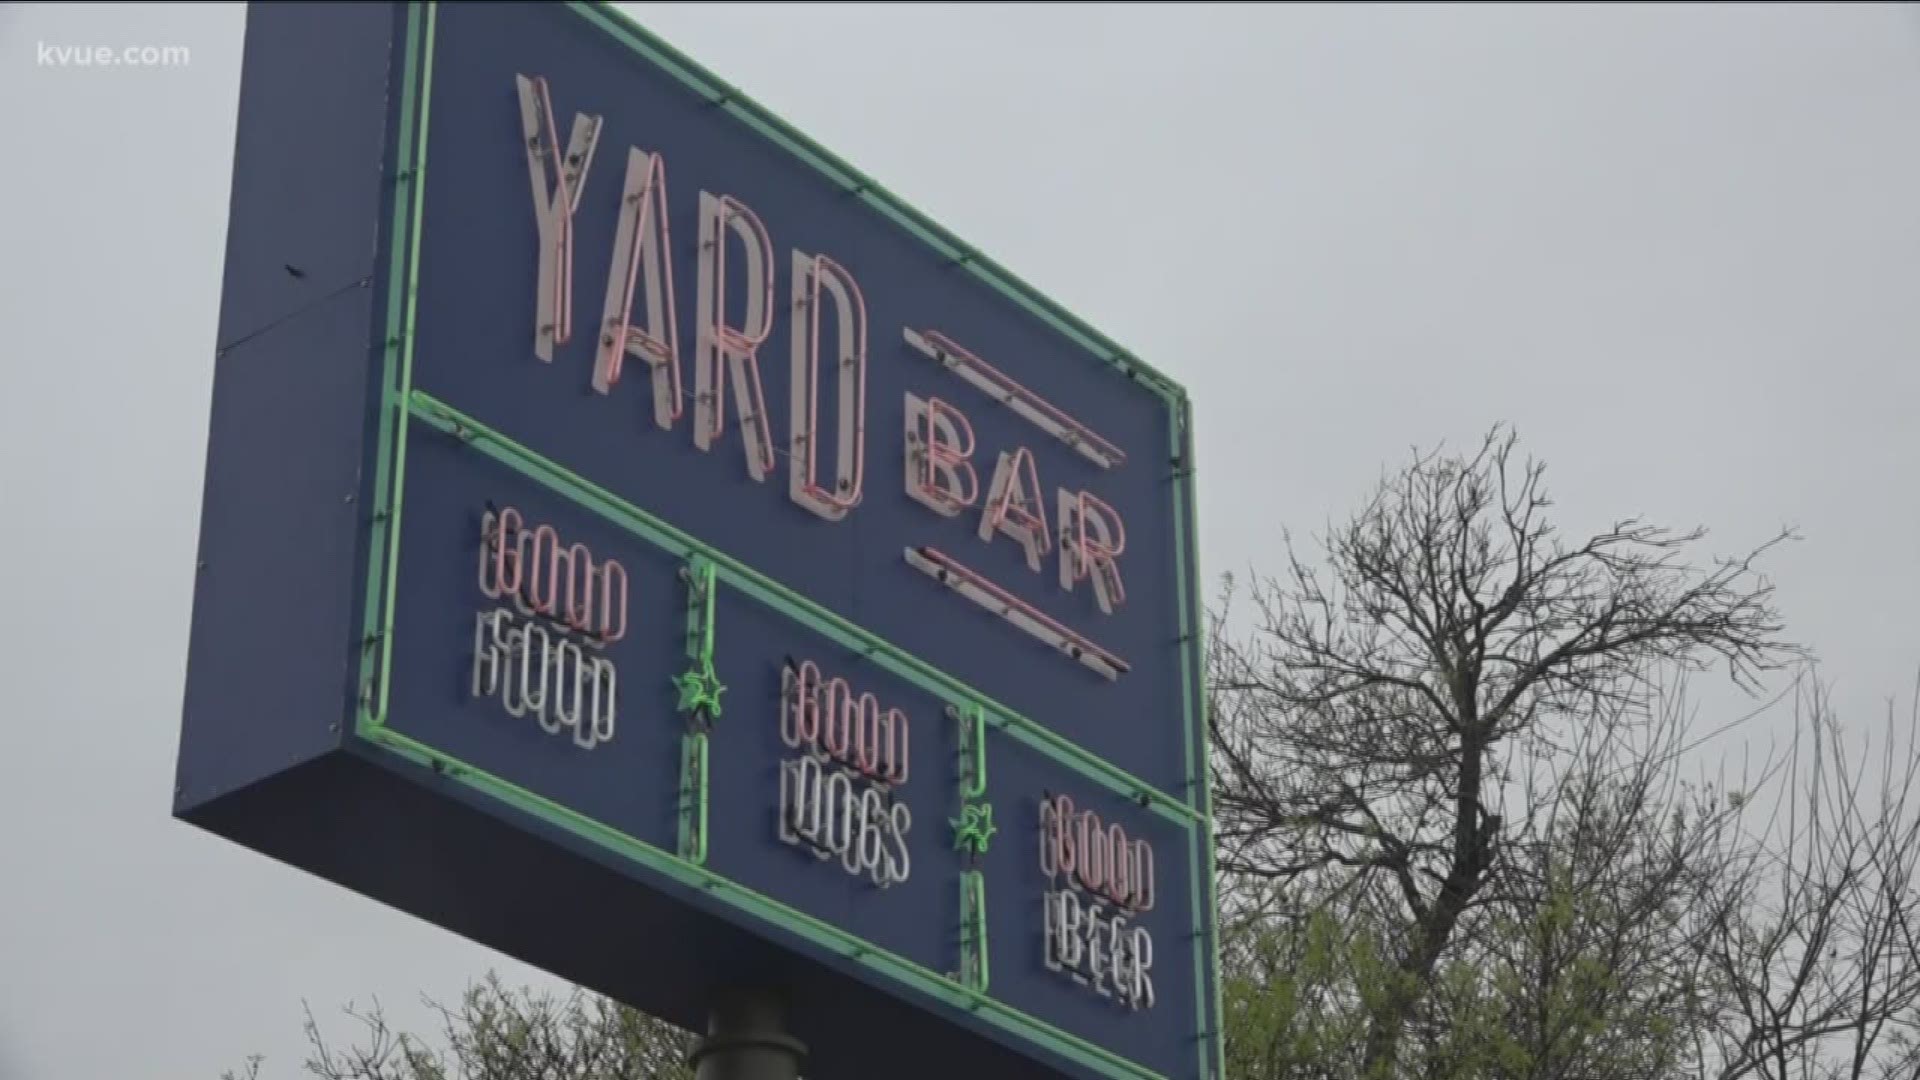 The city approved and issued a permit in December, giving Yard Bar the OK to have outdoor music on Fridays, Saturdays and Sundays during certain hours.